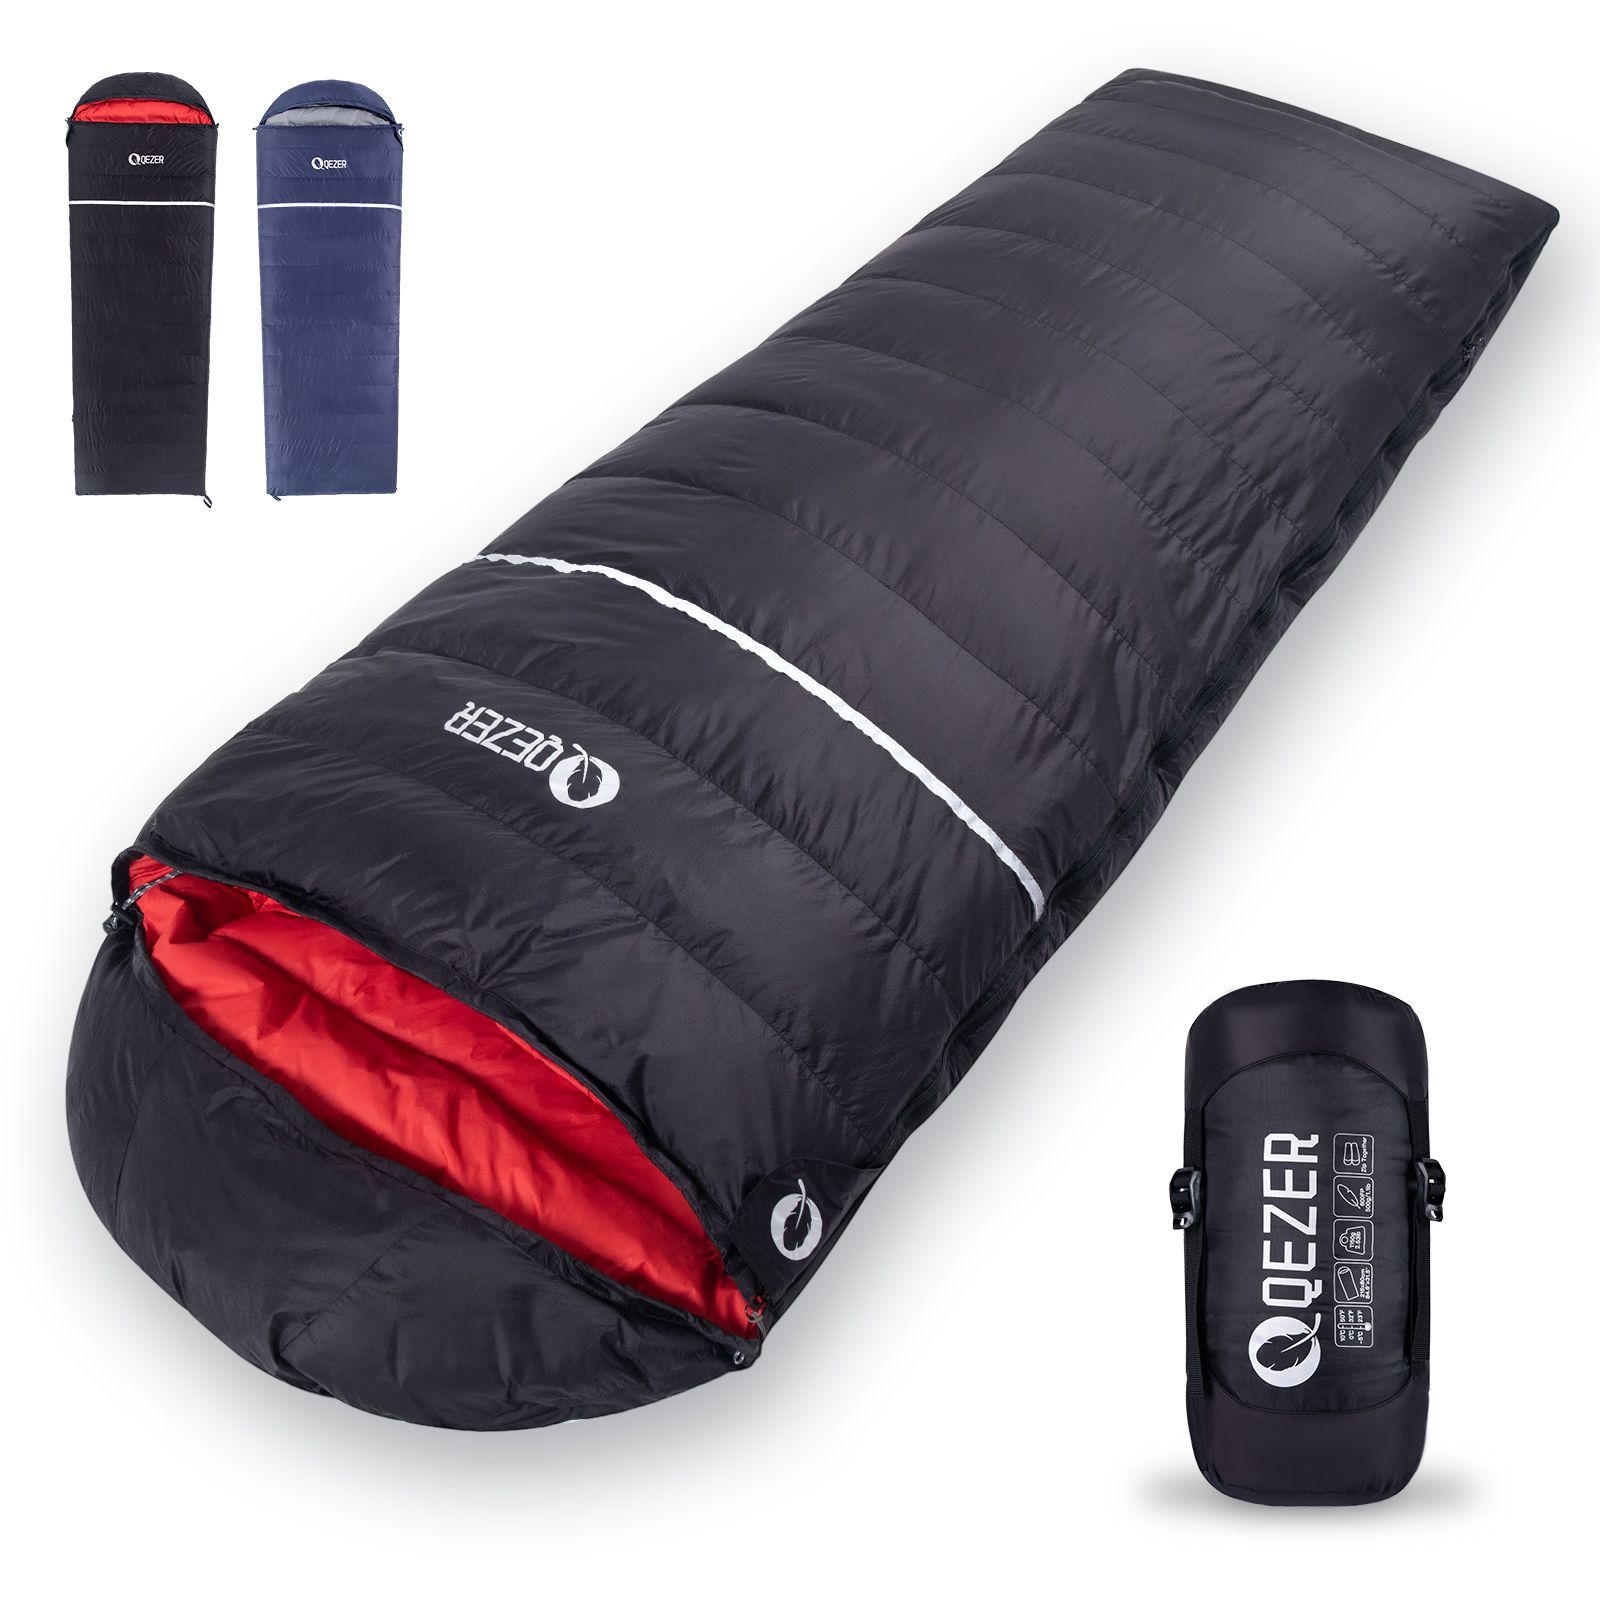 Qezer Down Sleeping Bag 10 degree F 32 degree for camping,backpacking